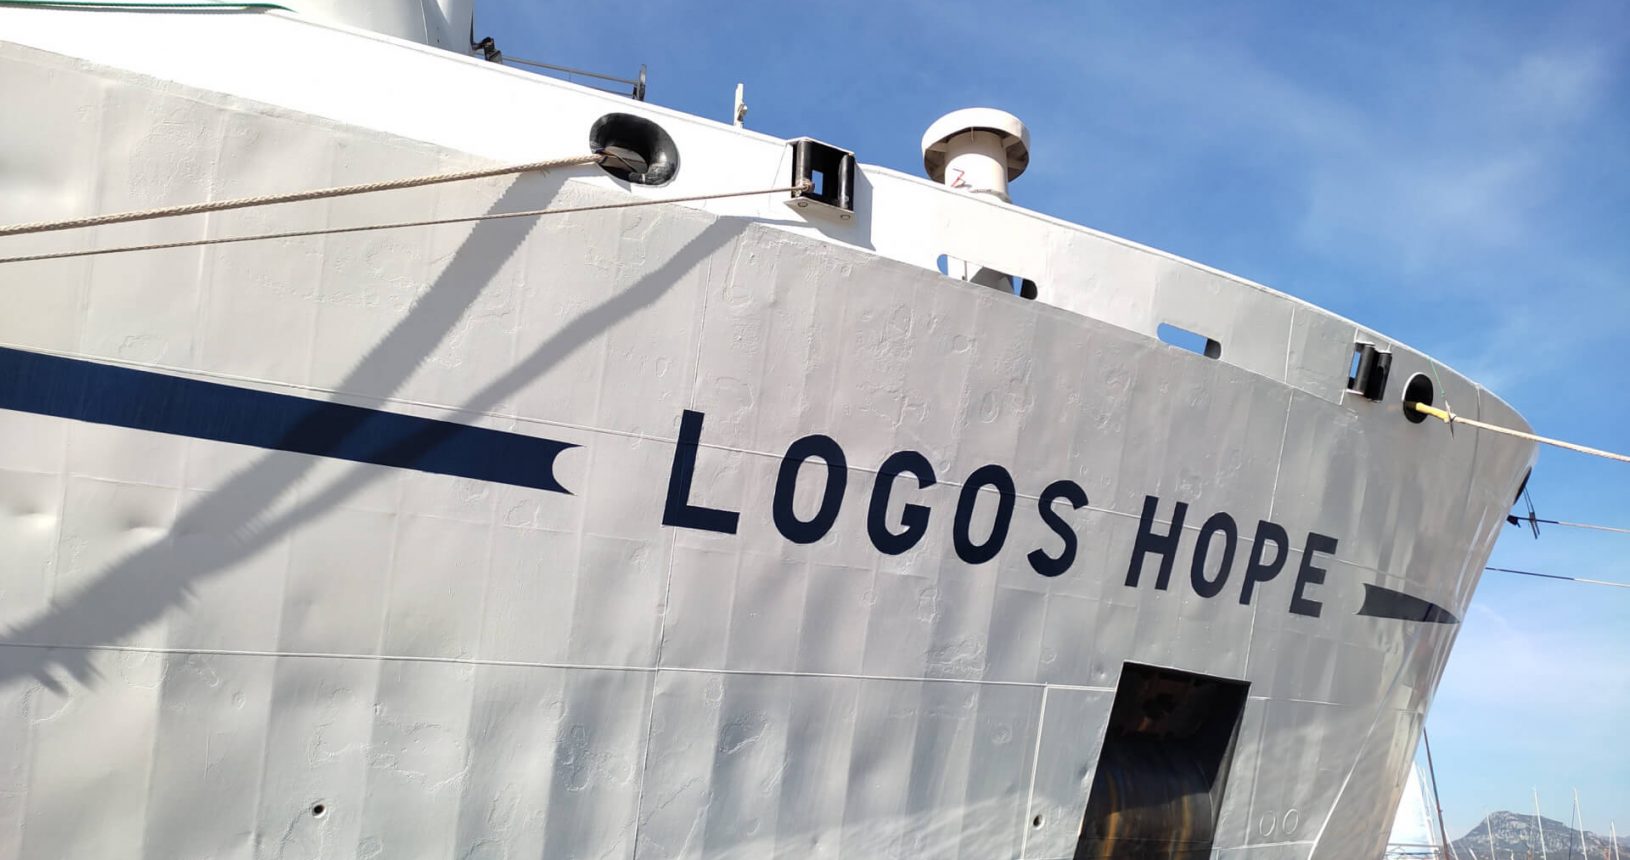 Logos Hope sign on the ship